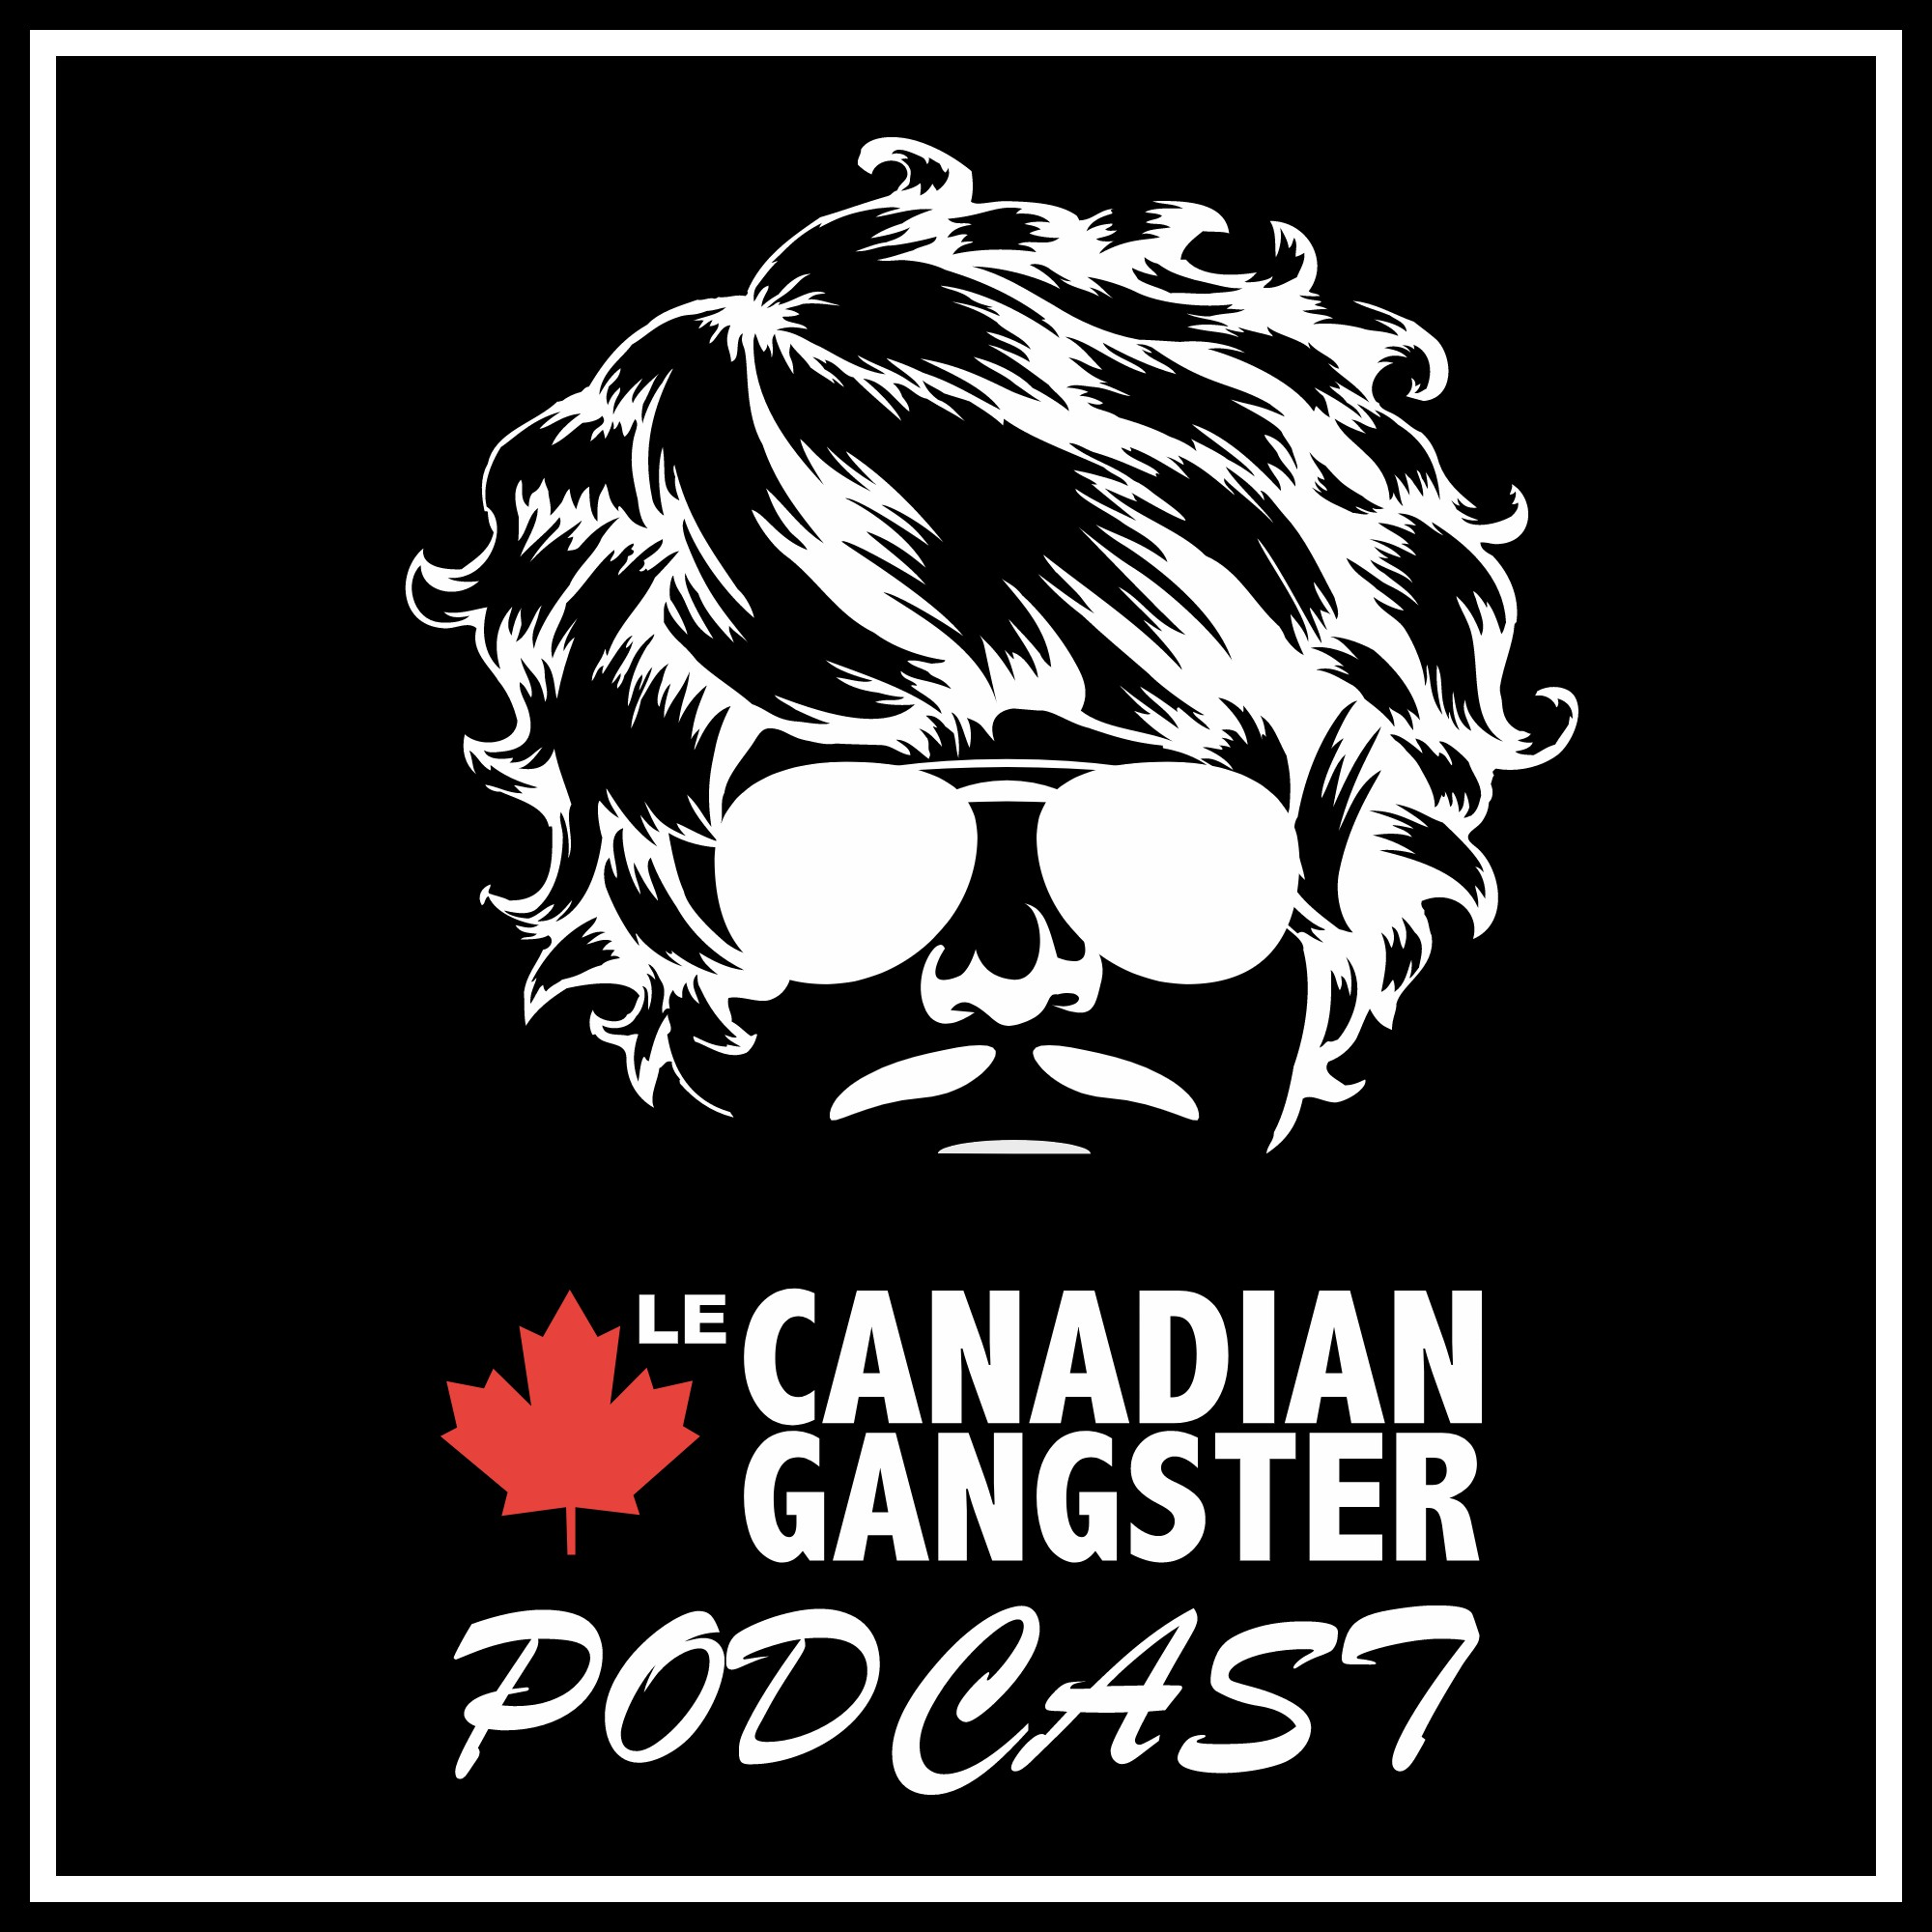 Le canadian gangster podcast 